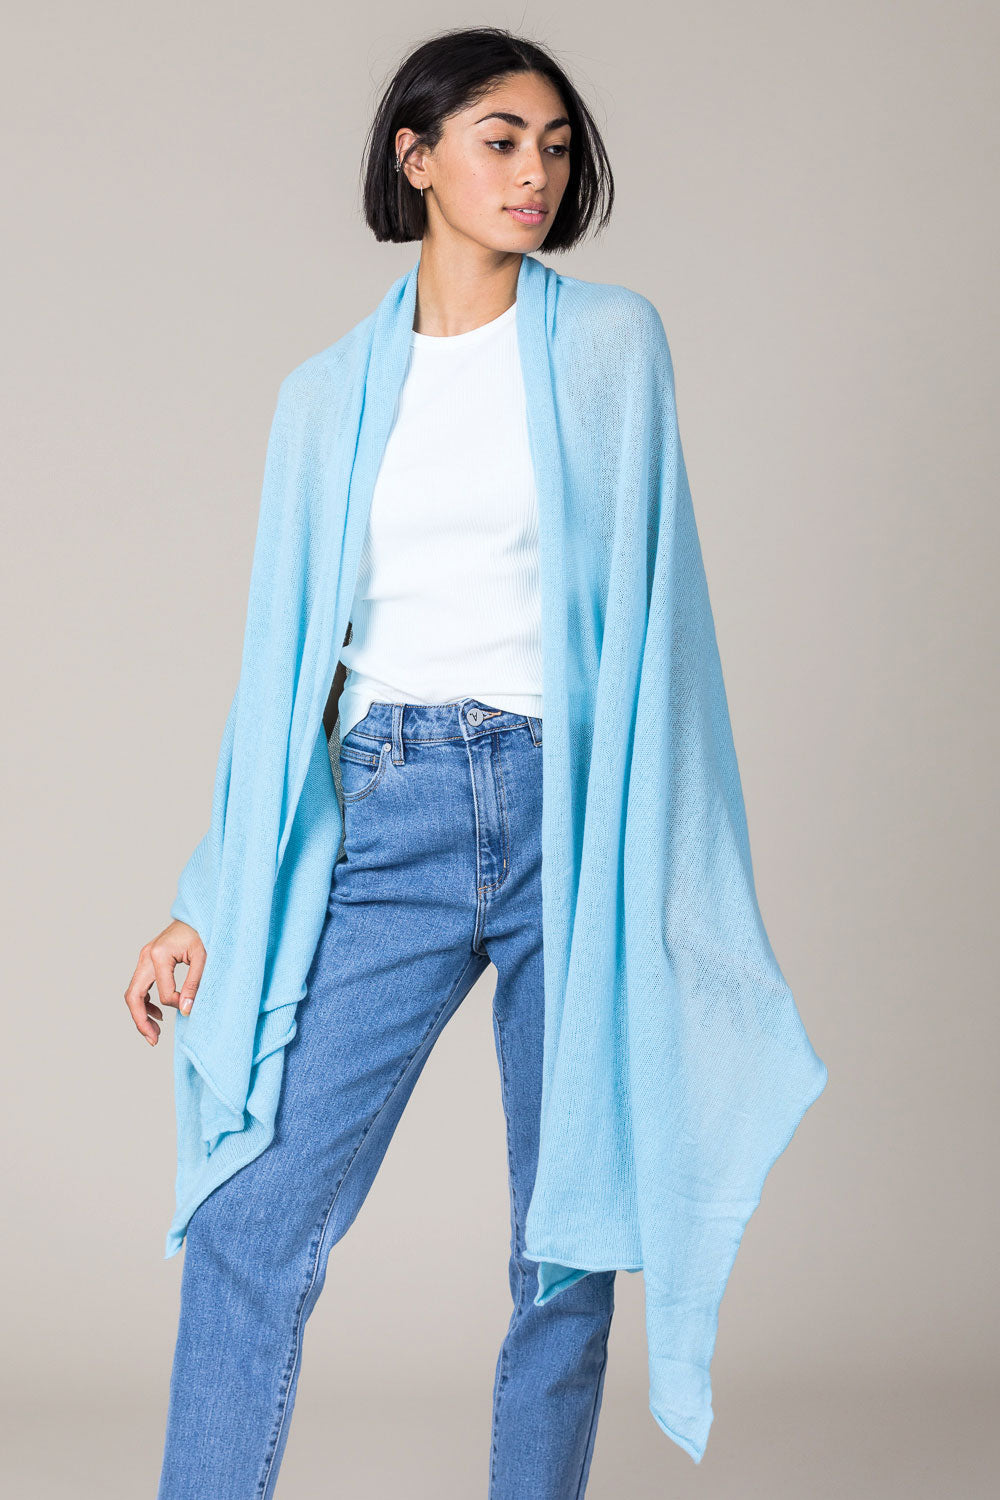 Cashmere Raw Edge Travel Wrap in Paradise Blue